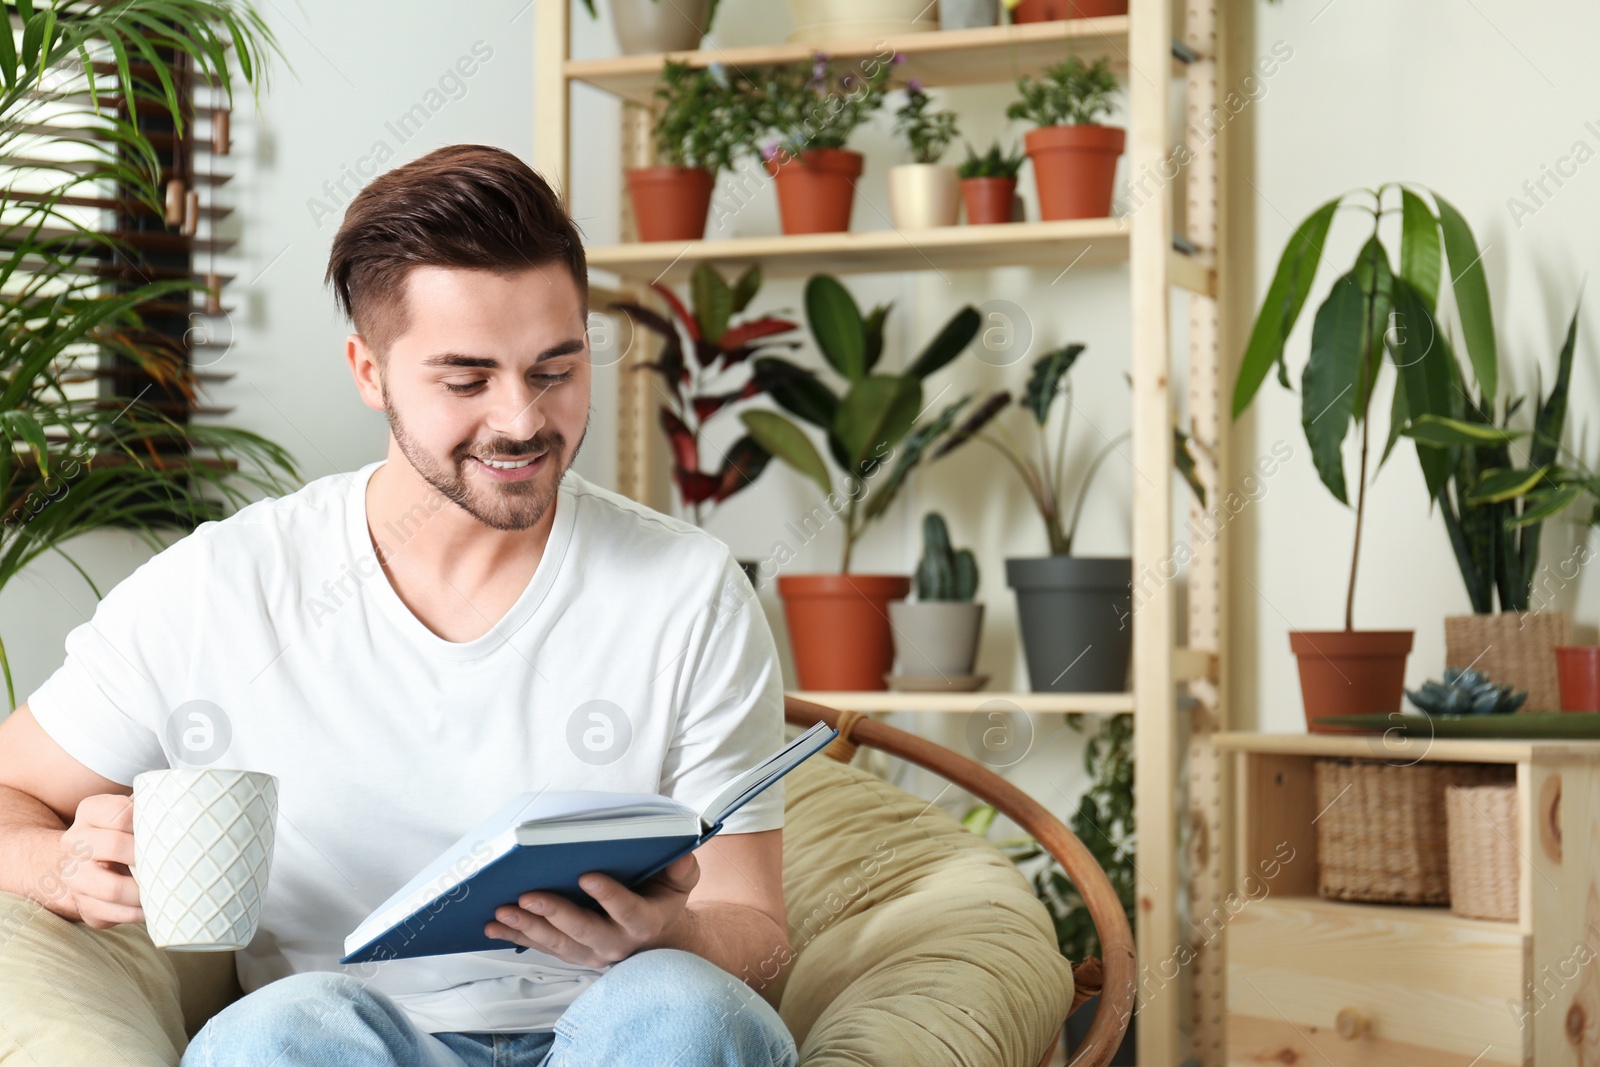 Photo of Young man reading book in room with different home plants